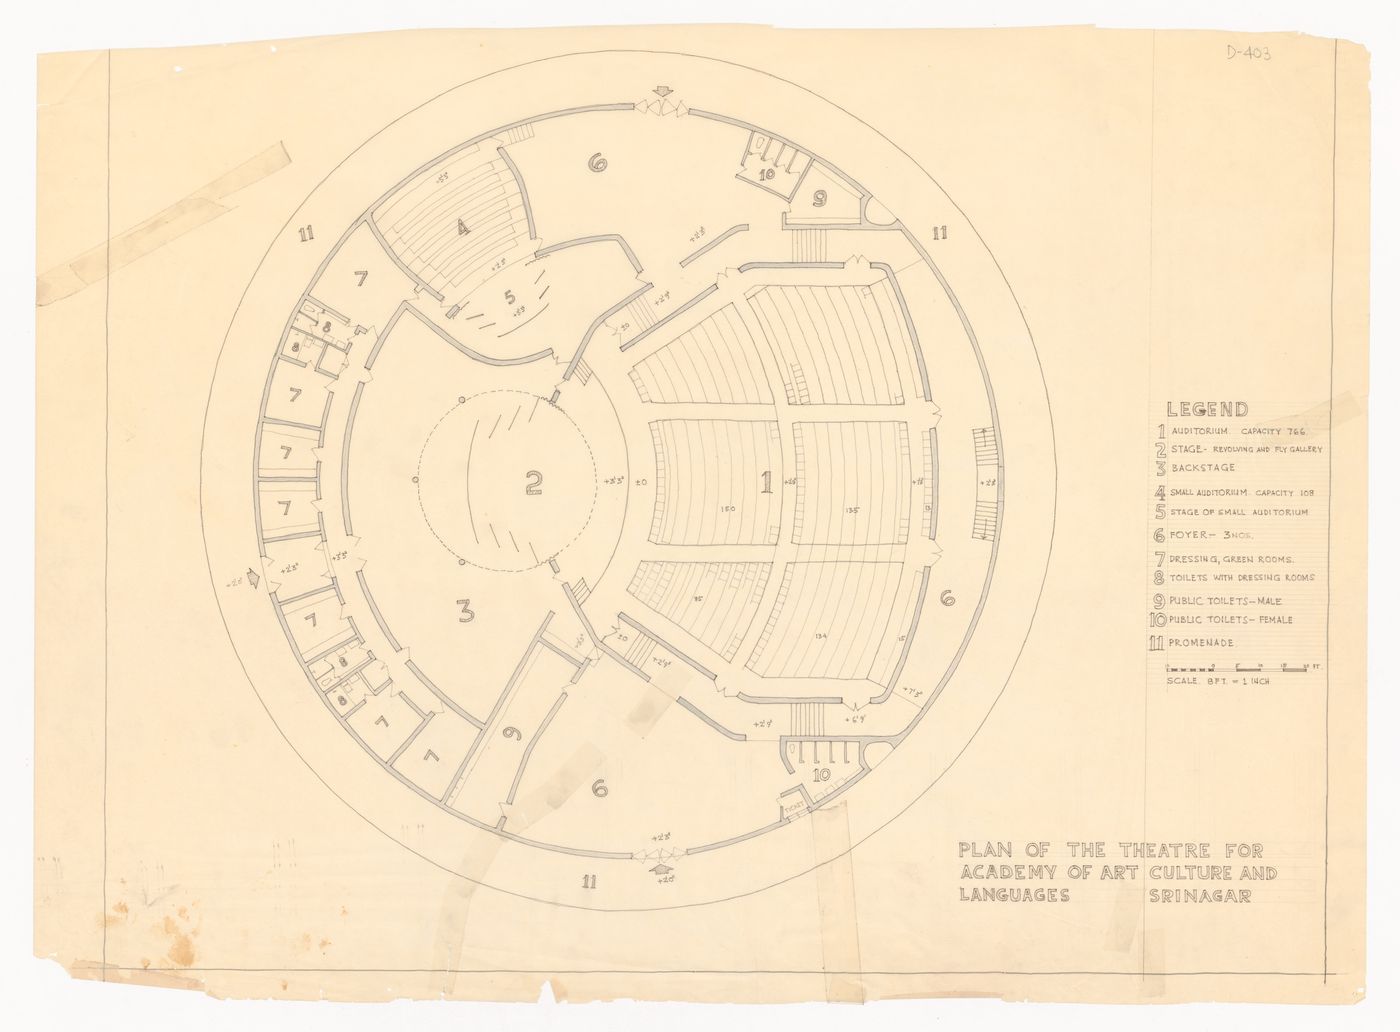 Plan for the theatre for J&K Academy of Art, Culture and Languages, Srinagar, India